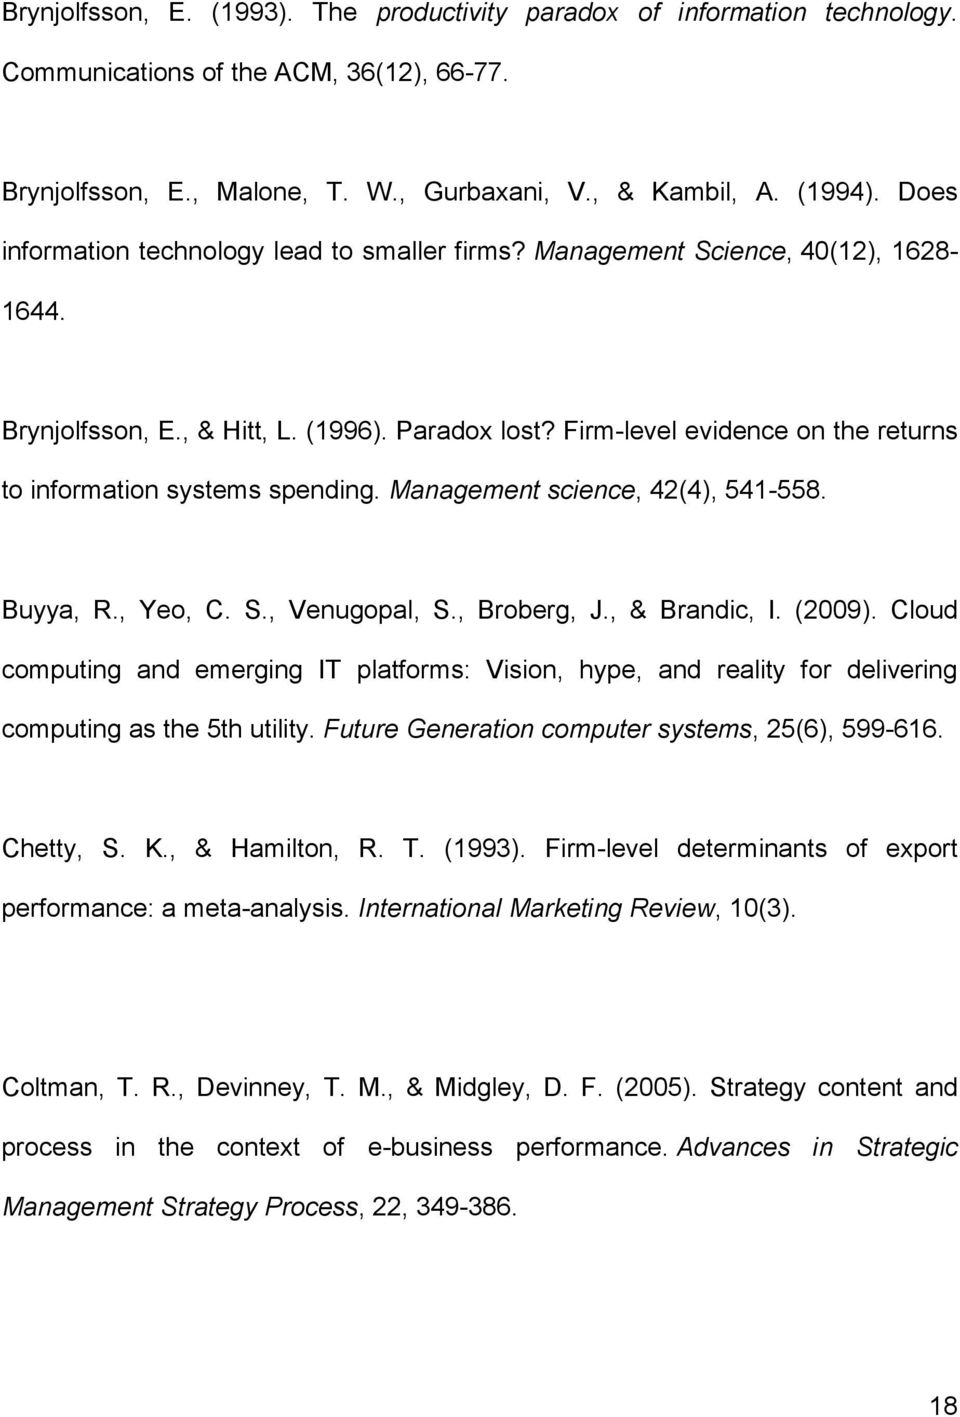 Firm-level evidence on the returns to information systems spending. Management science, 42(4), 541-558. Buyya, R., Yeo, C. S., Venugopal, S., Broberg, J., & Brandic, I. (2009).